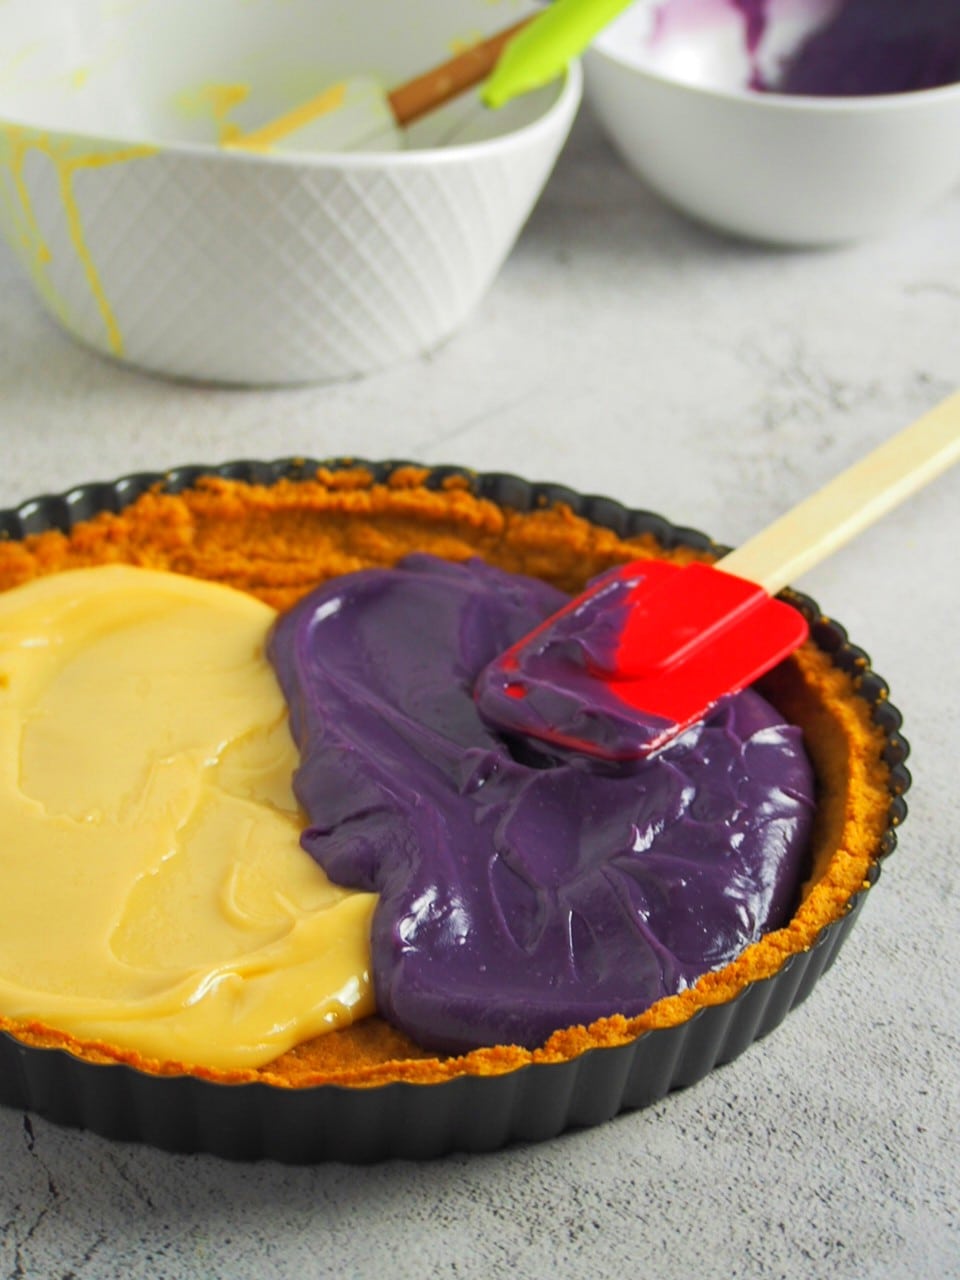 The milk and ube custard poured into the tart shell.